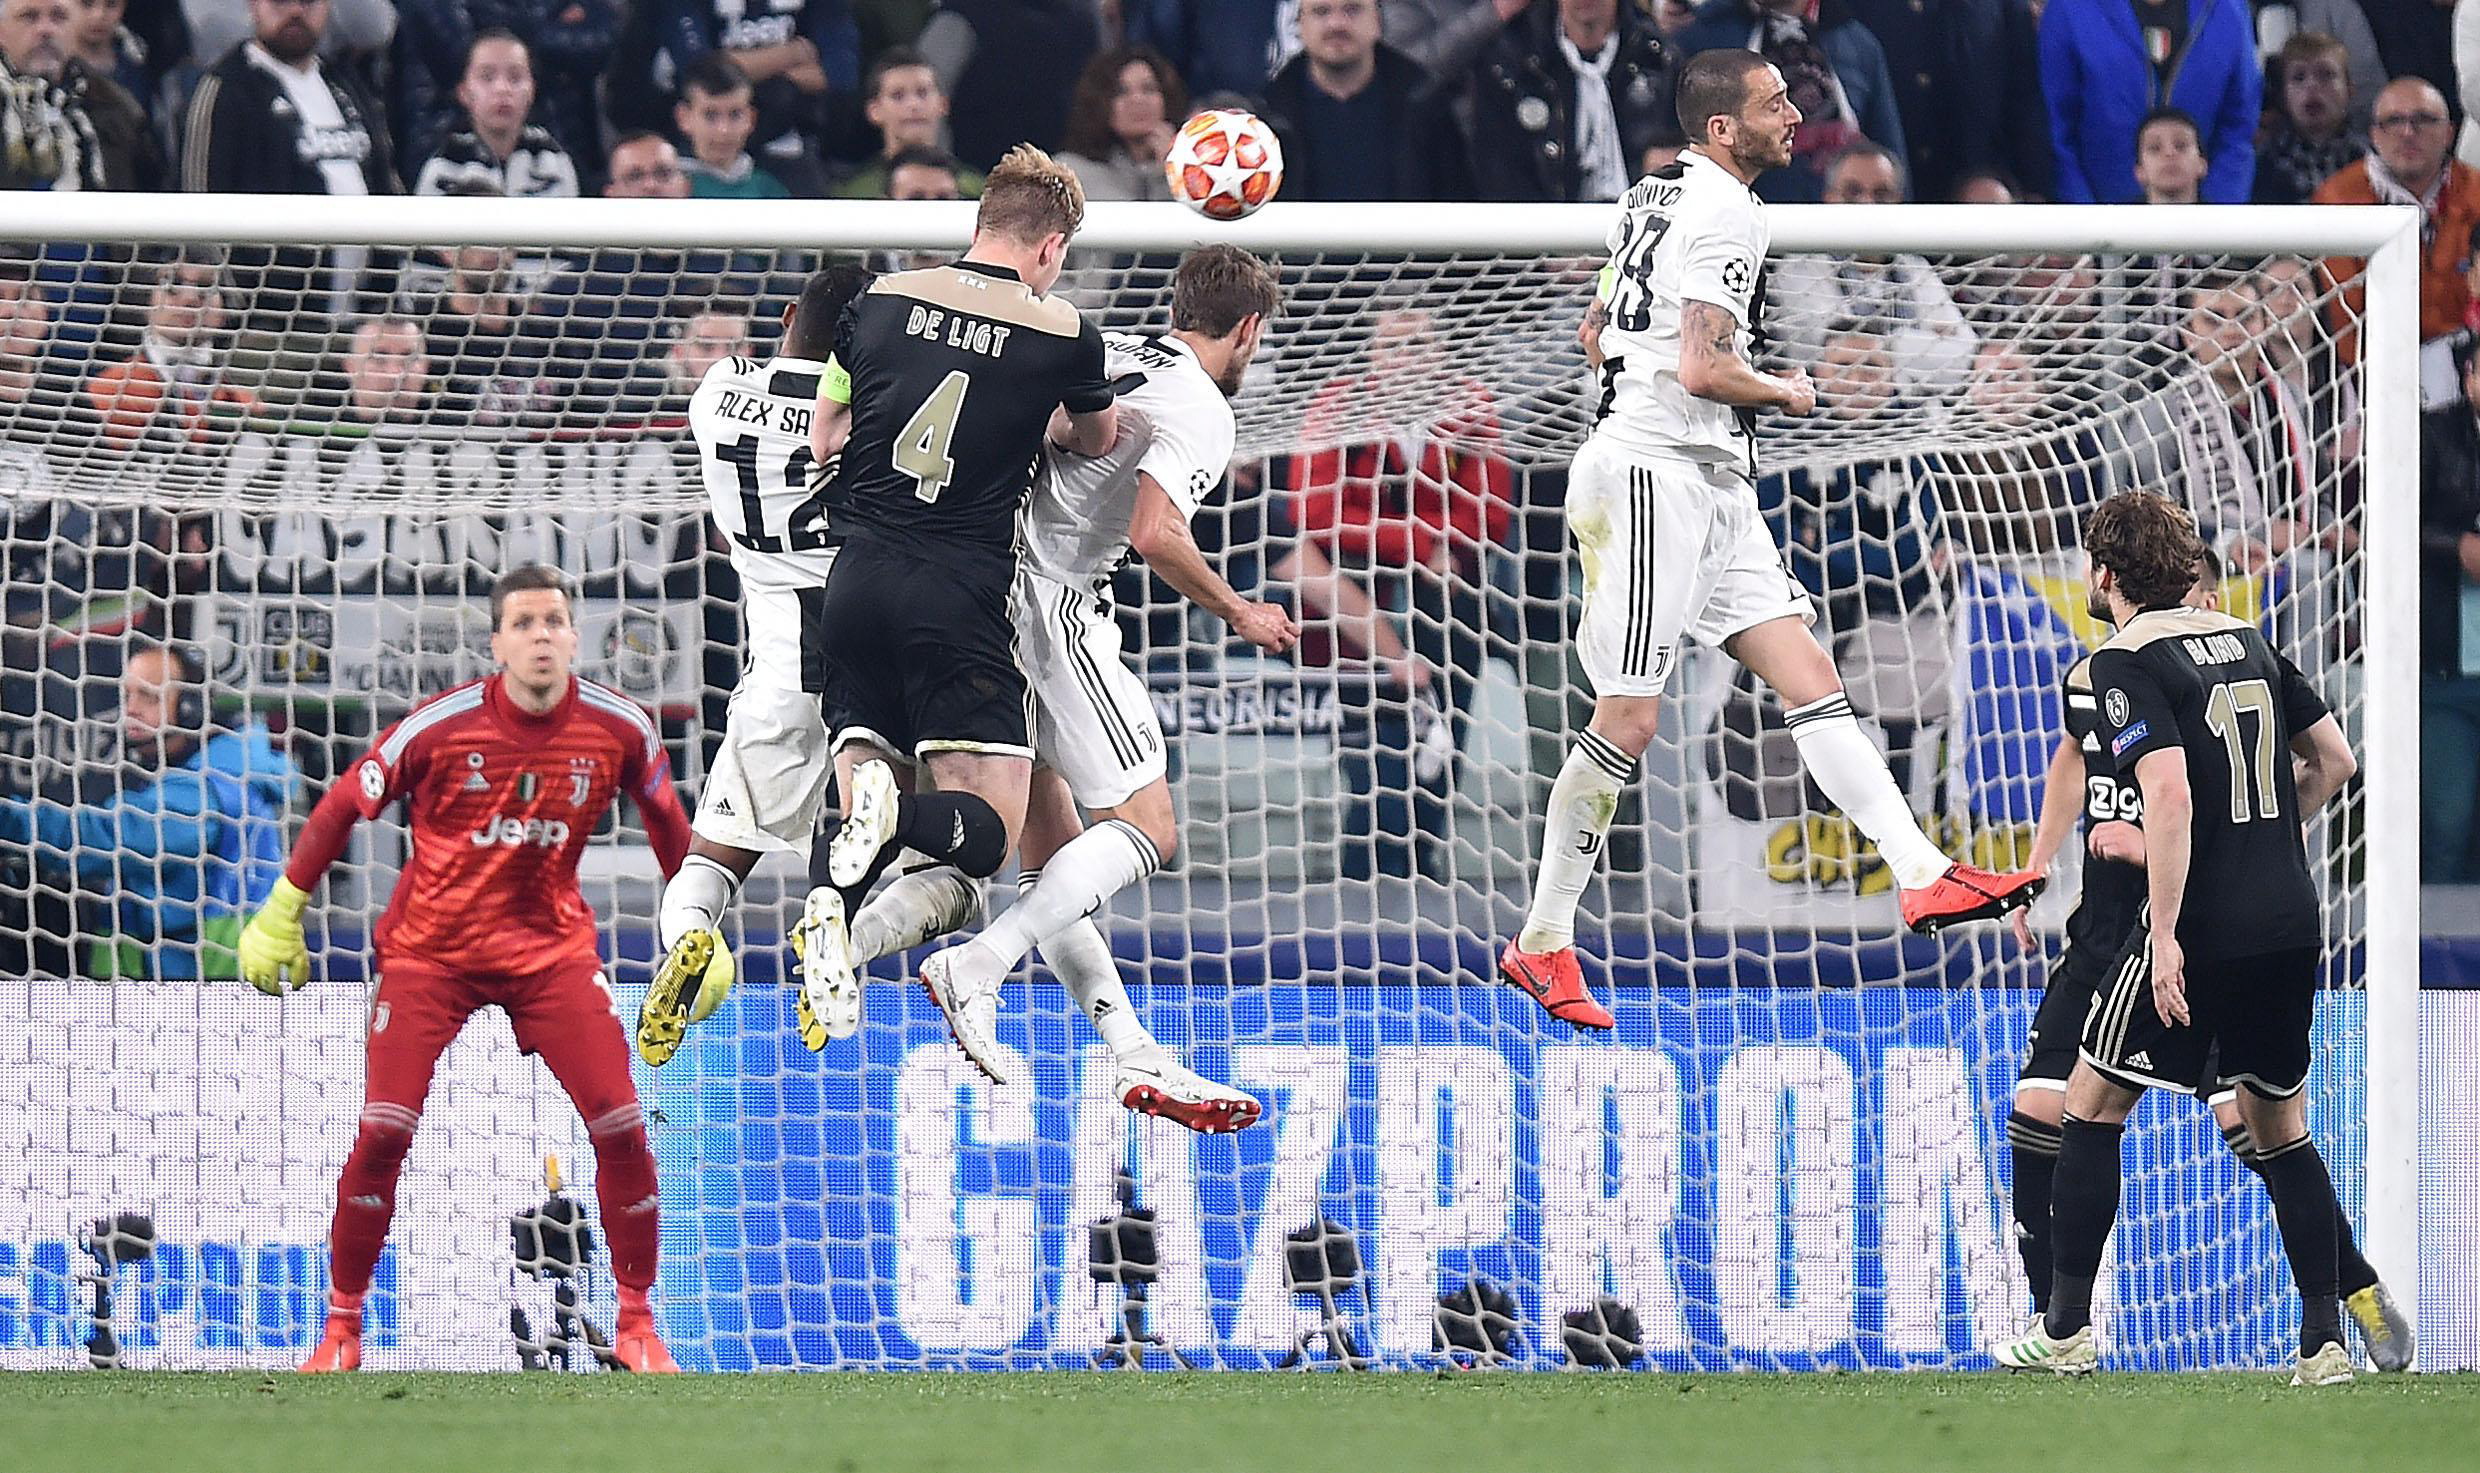 epa07510923 Ajax's Matthijs de Light (3-R) scores the 1-2 goal during the UEFA Champions League quarter final, second leg, soccer match between Juventus FC and Ajax Amsterdam in Turin, Italy, 16 April 2019.  EPA/ALESSANDRO DI MARCO